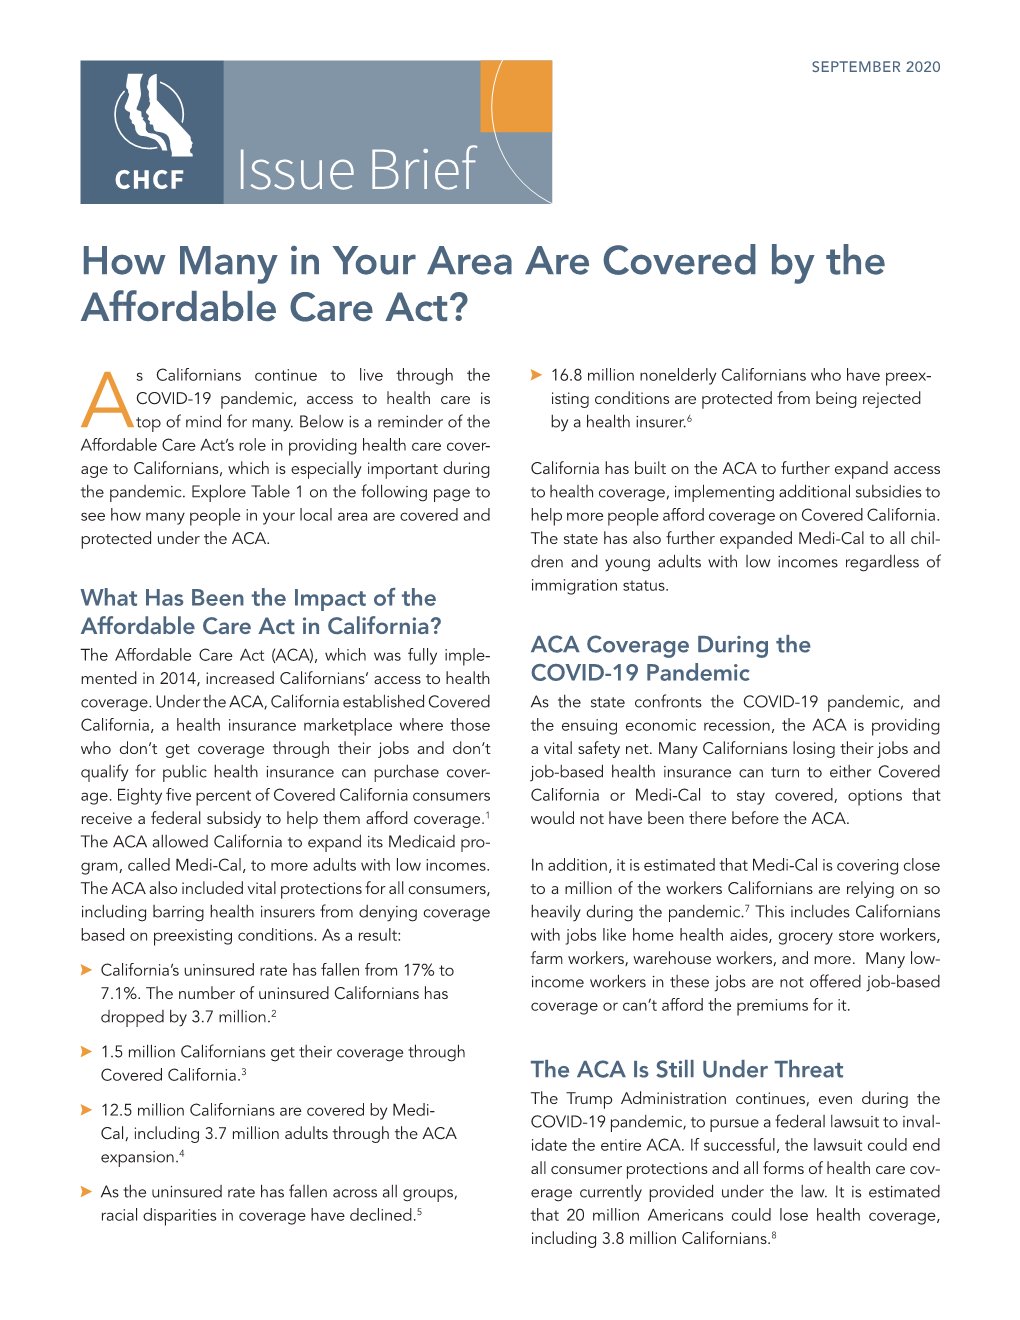 How Many in Your Area Are Covered by the Affordable Care Act?